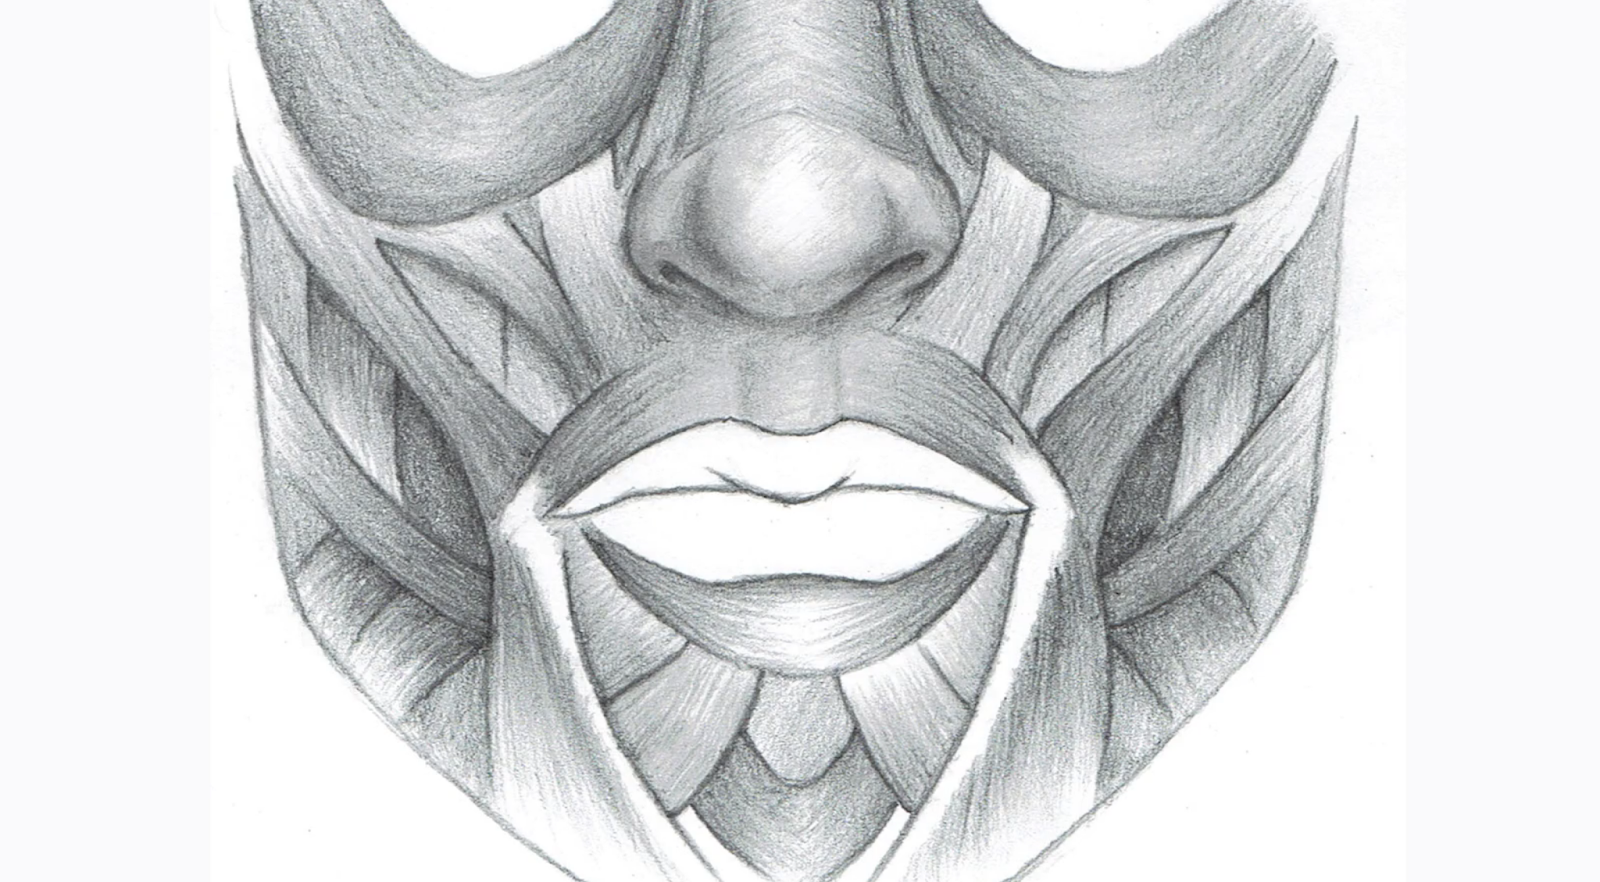 Many of the muscles in the face converge on the mouth area. 